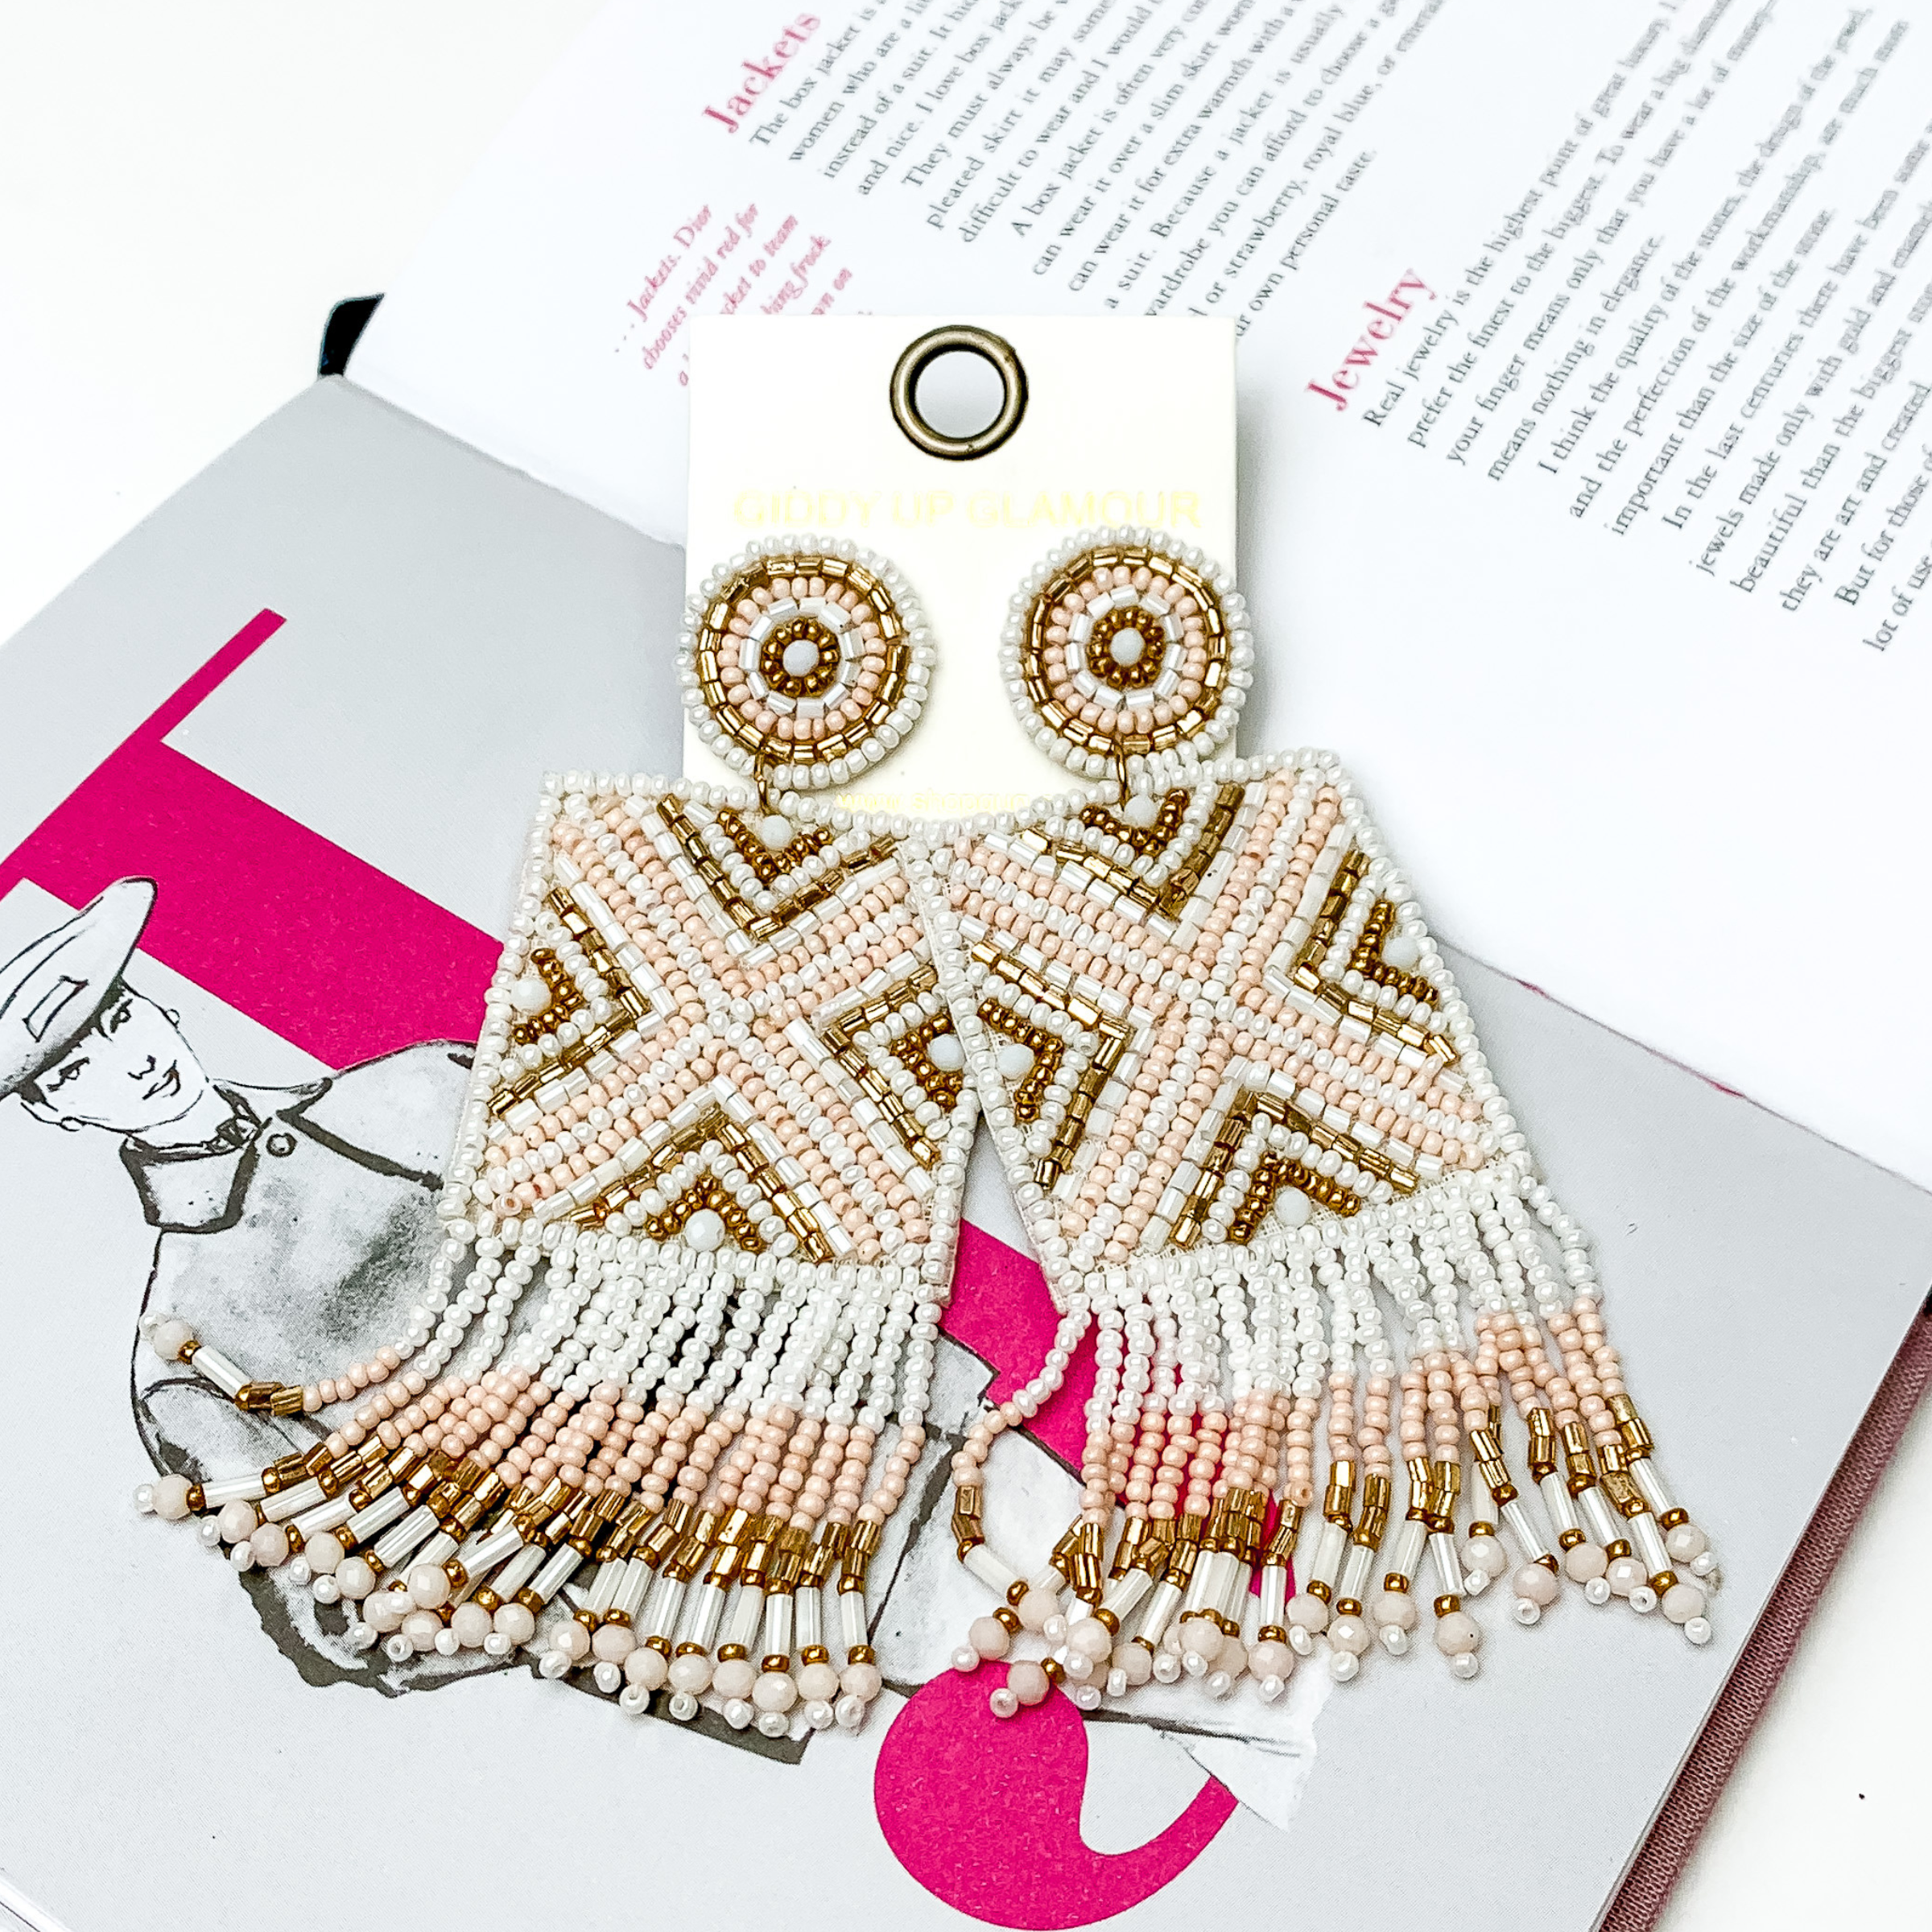 These are circle post back, beaded earrings with a beaded square drop that has fringe on the bottom side of the square. These earrings include white beads, pale pink beads, and gold beads. These earrings are pictured on top of an open book on a white background. 